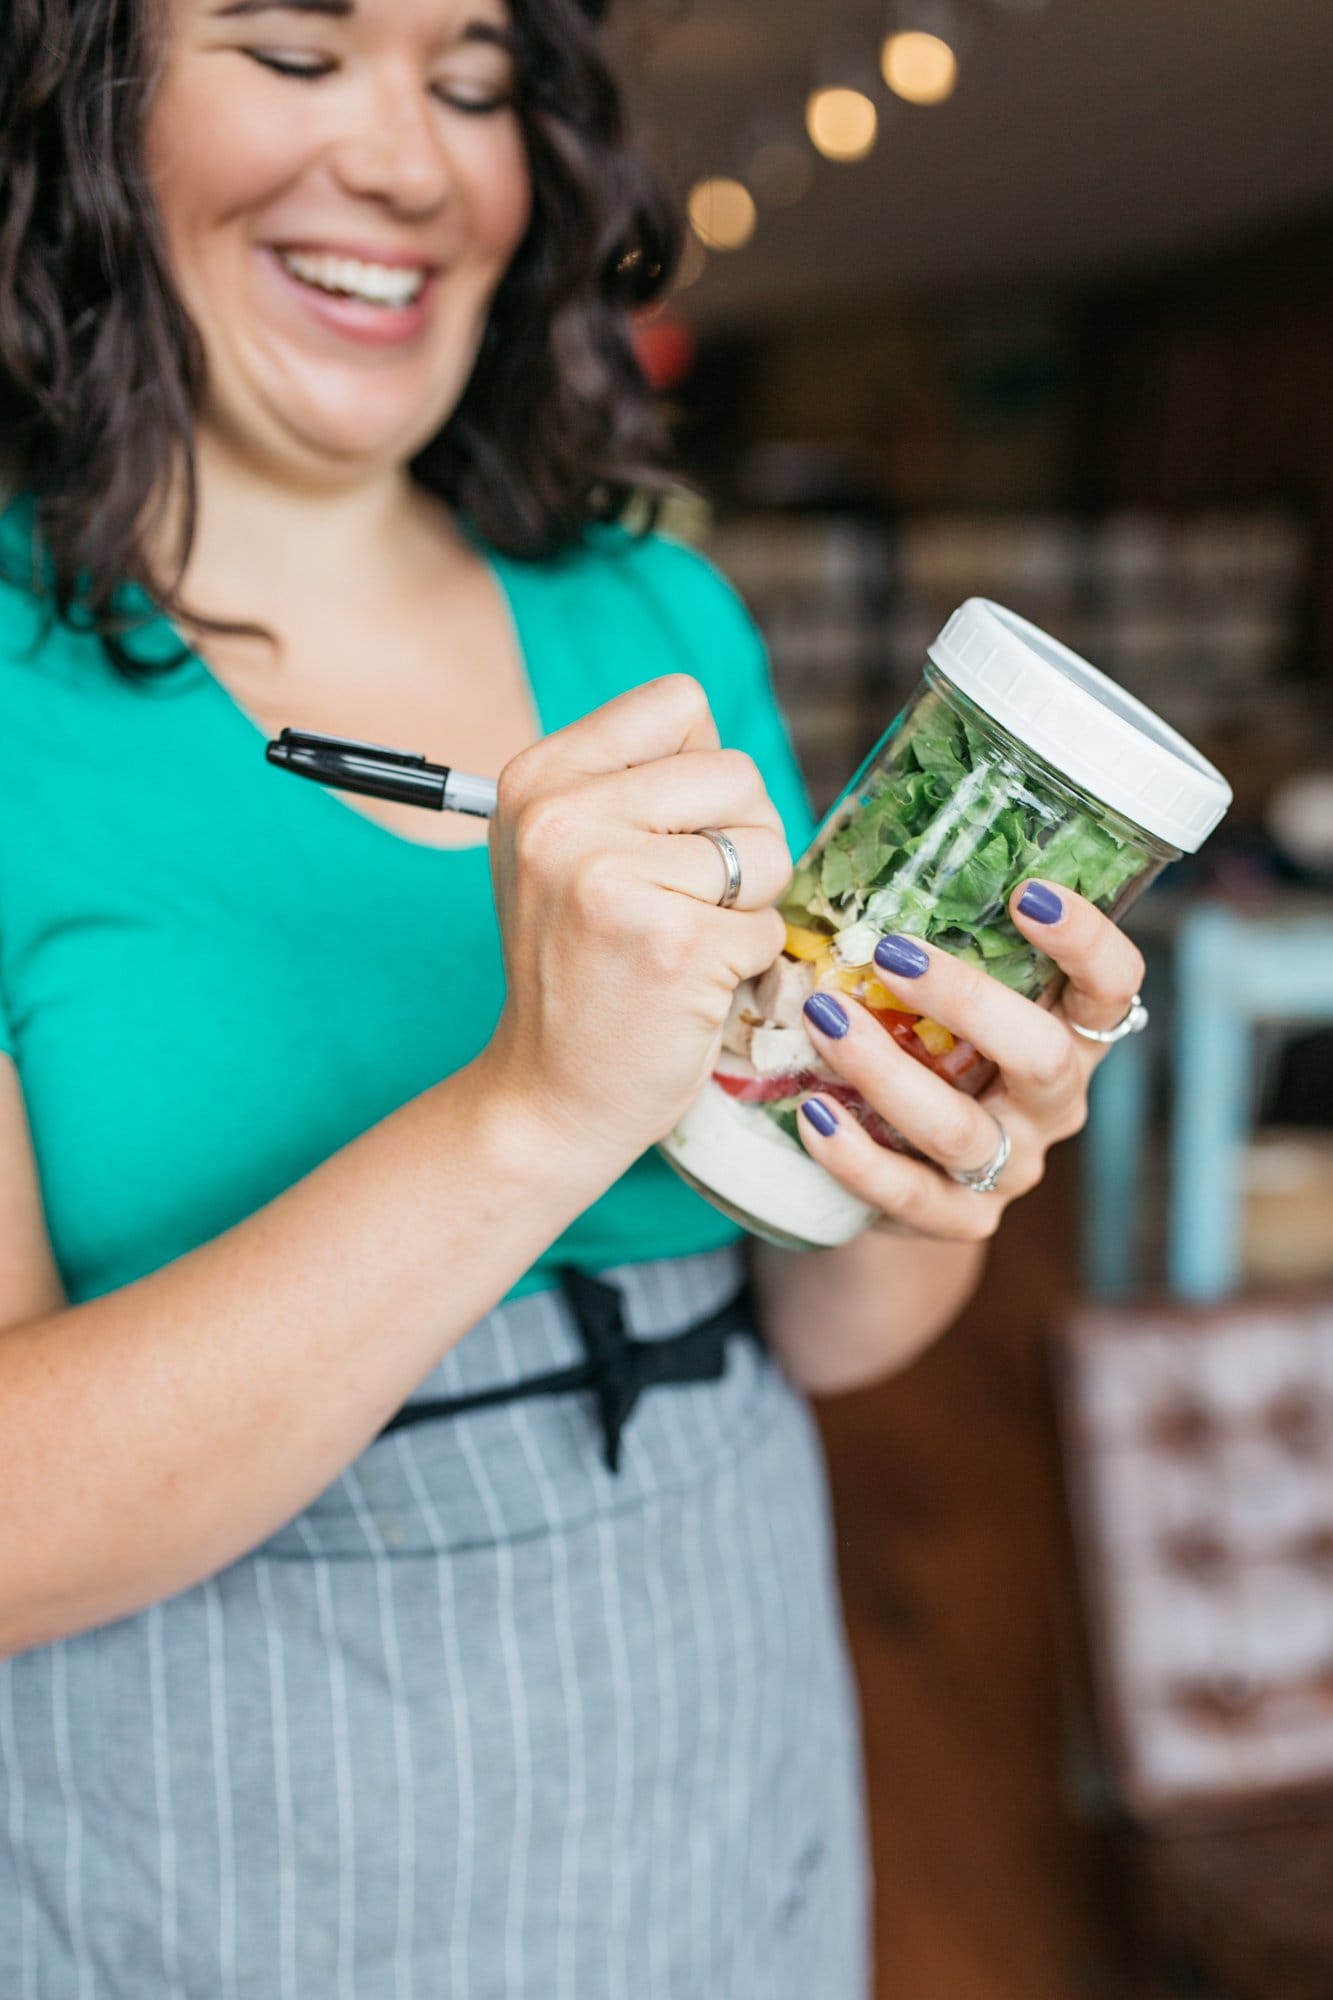 Woman in a teal shirt using a Sharpie to label a glass jar filled with salad in a jar.